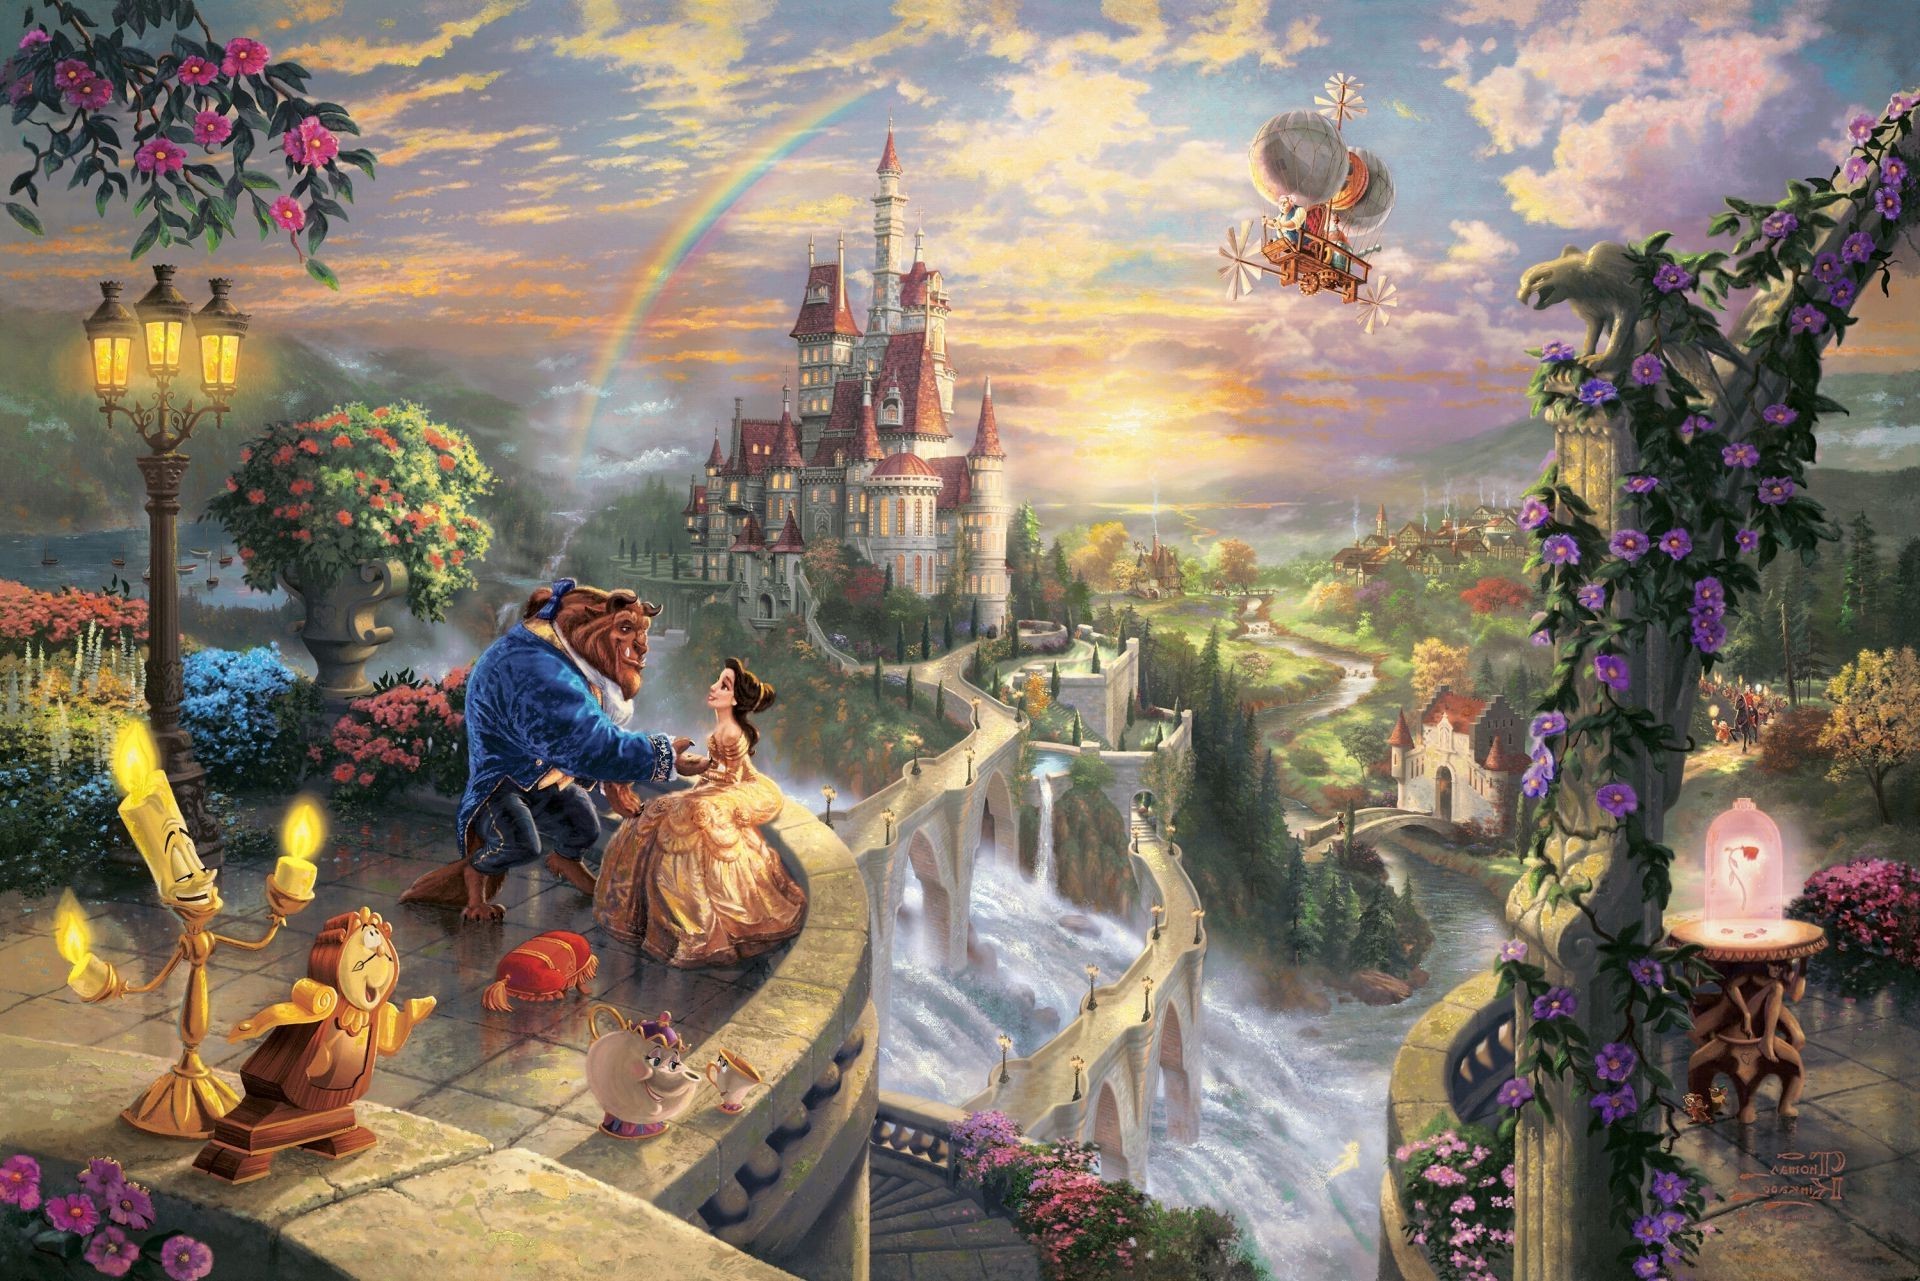 1920x1281 Thomas kinkade the disney dreams collection beauty and the .